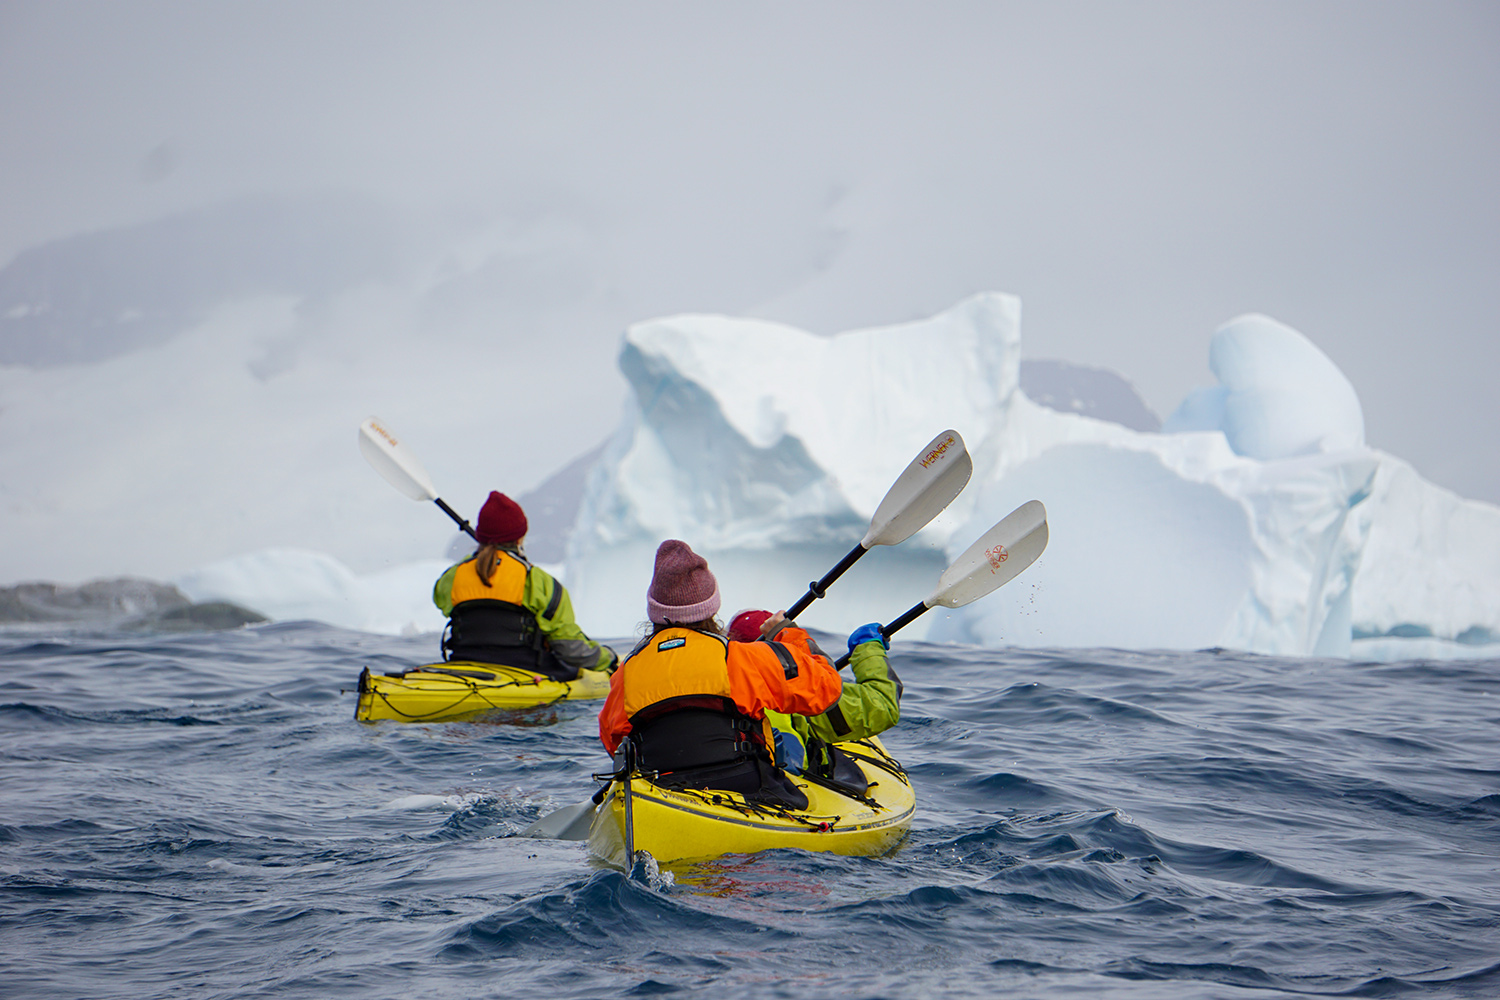 kayakers in two boats approach an iceberg